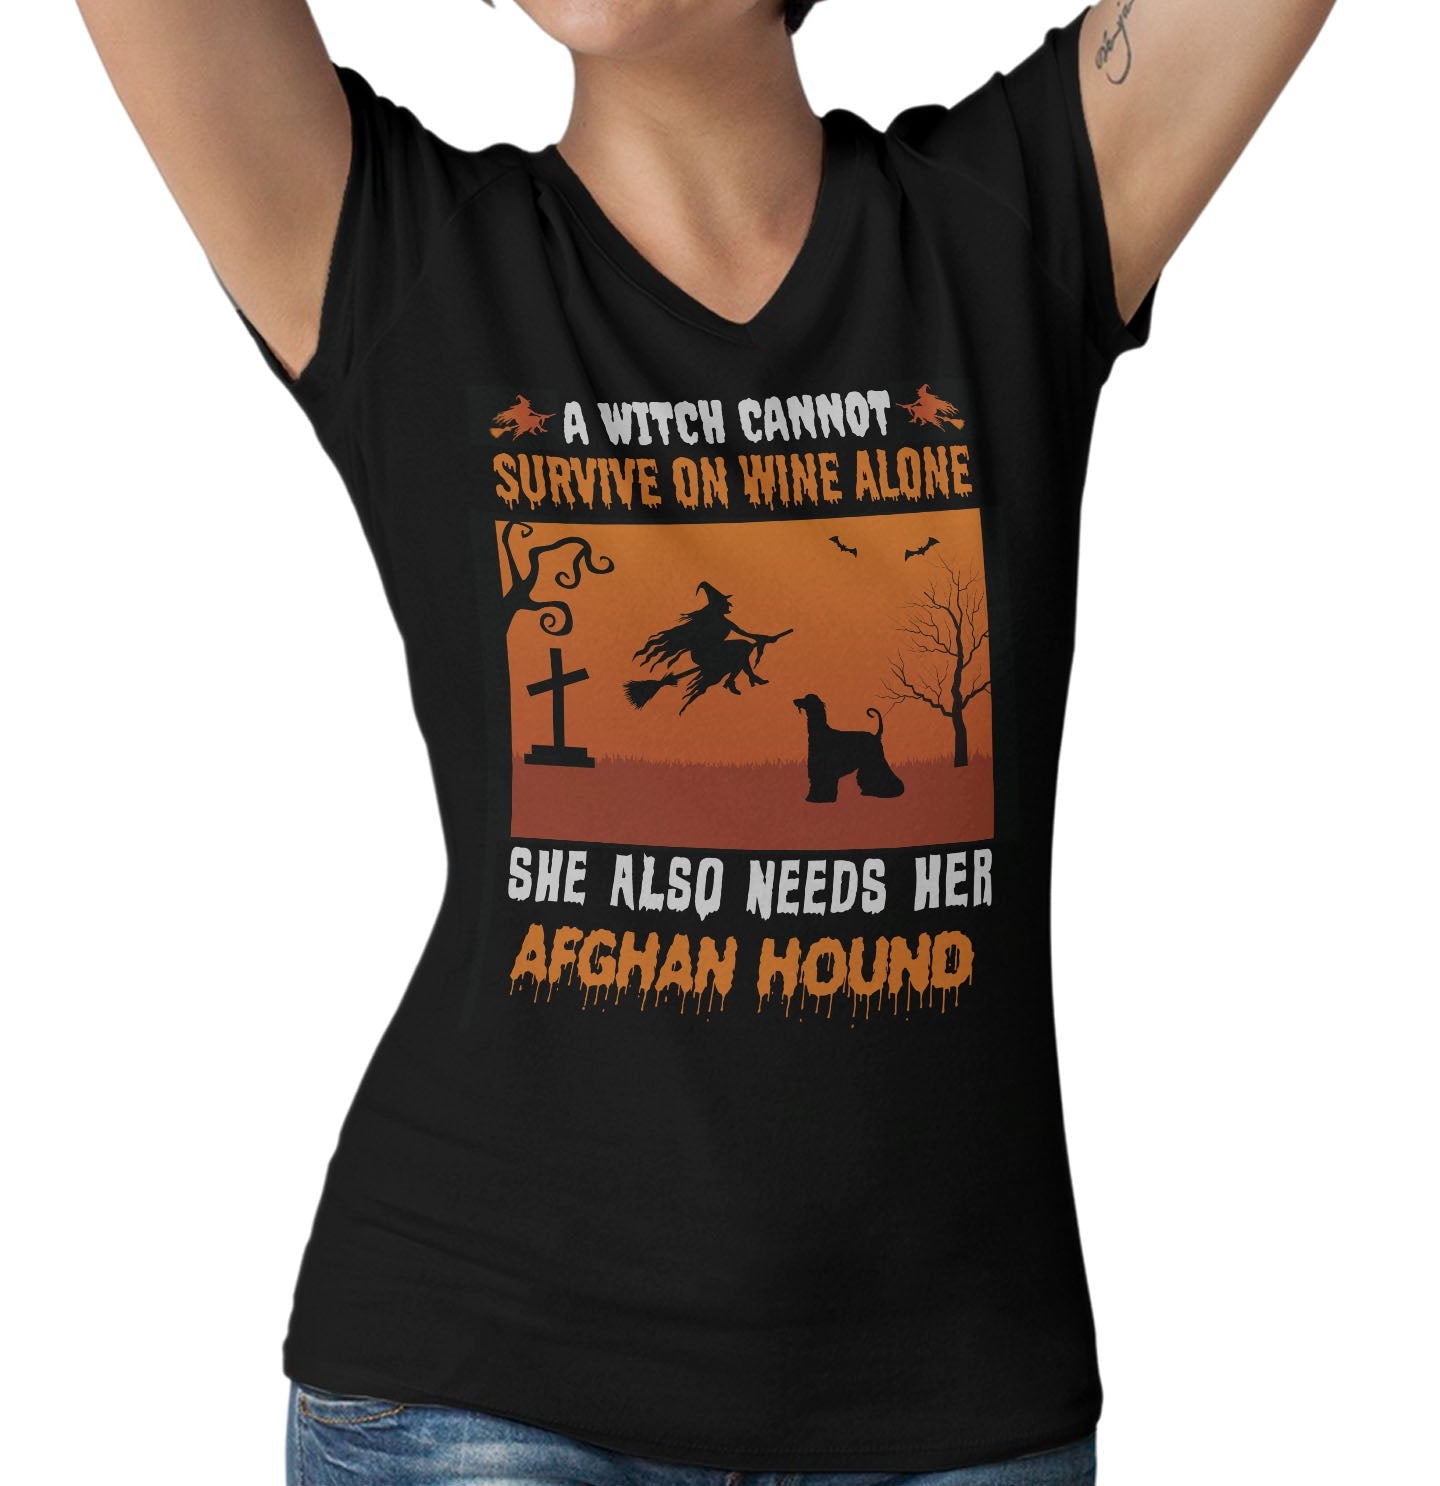 A Witch Needs Her Afghan Hound - Women's V-Neck T-Shirt